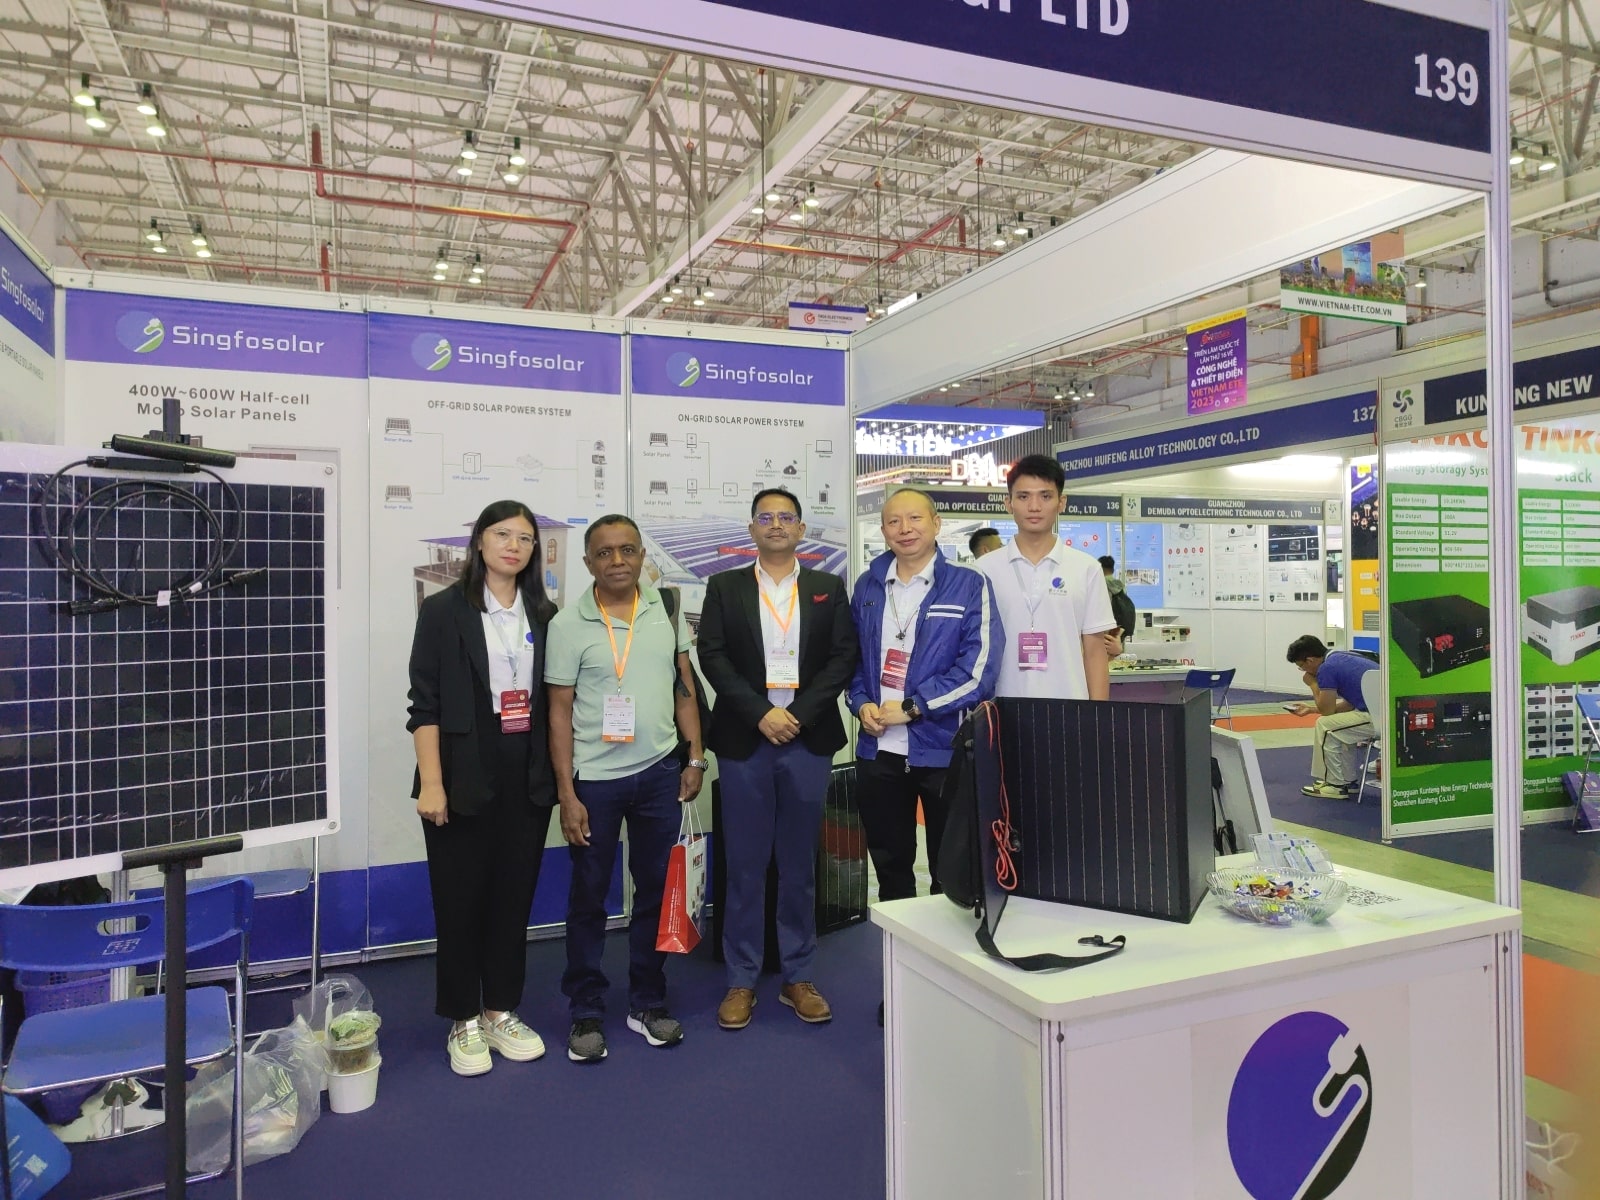 The 13th International Exhibition on Products, Technologies of Energy Saving